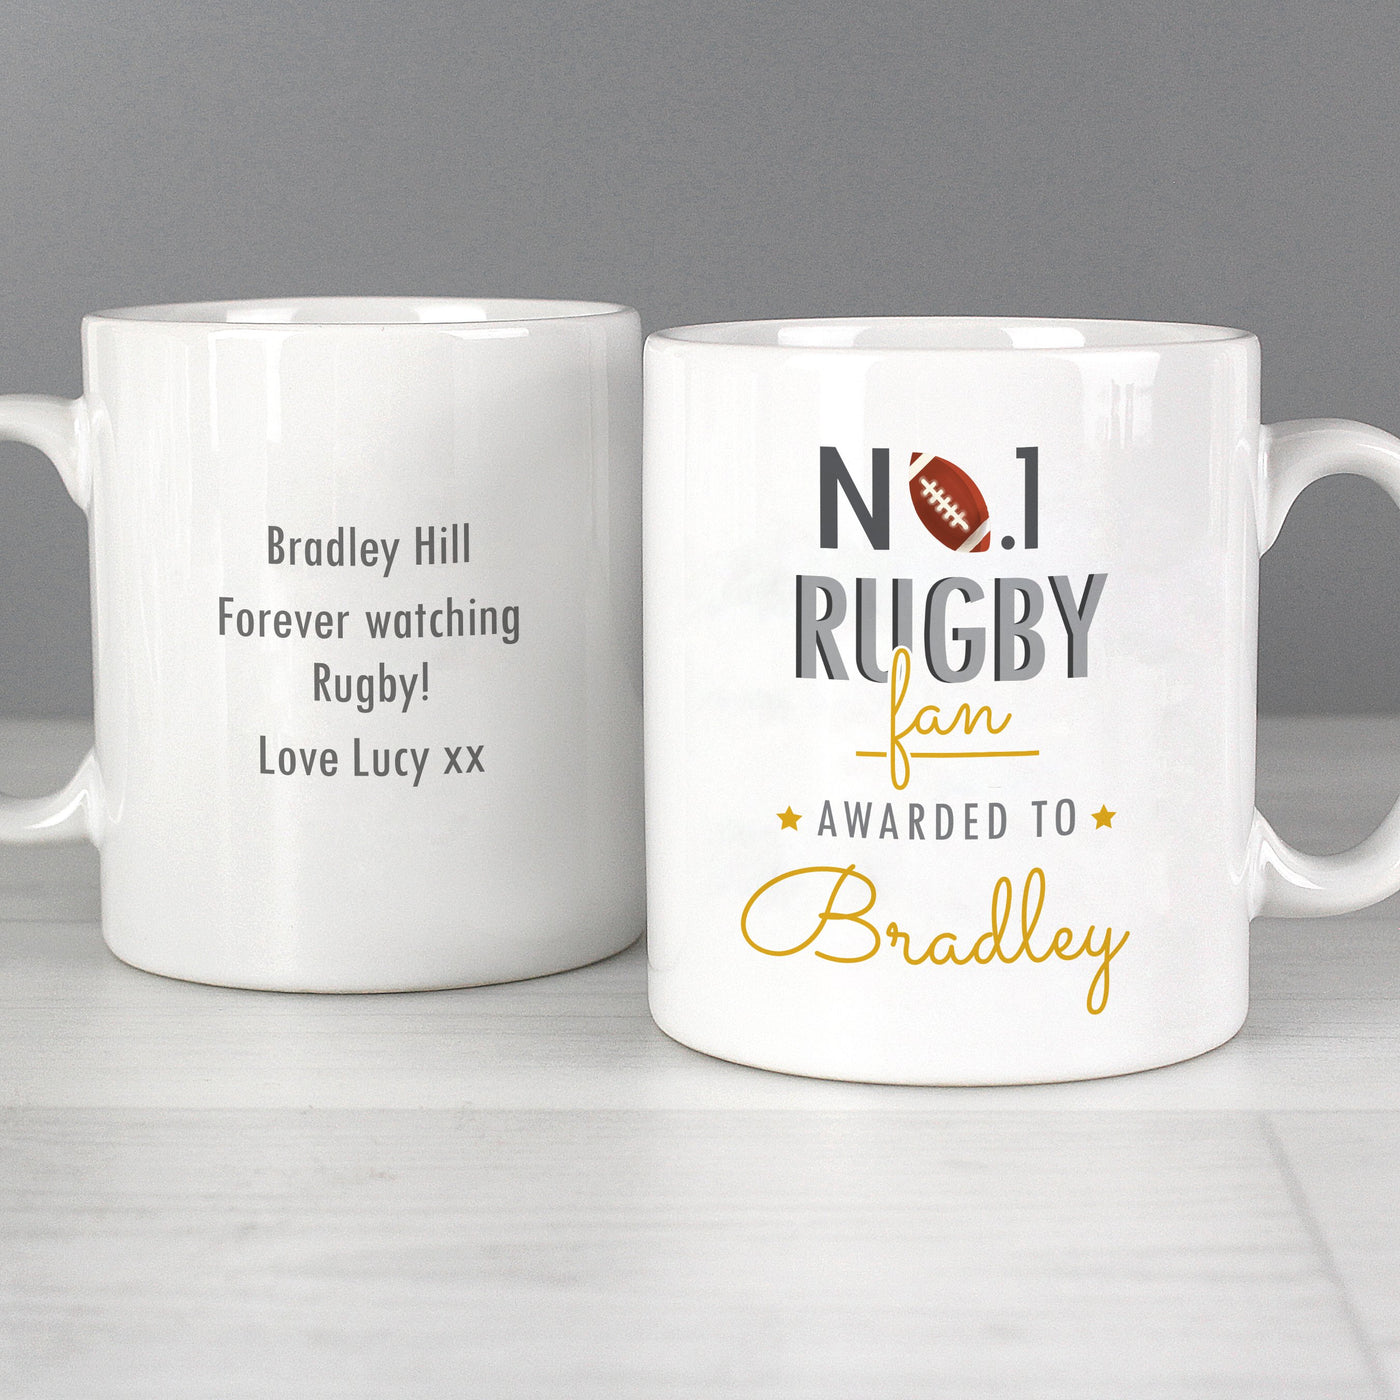 Personalised No.1 Rugby Fan Ceramic Mug - Shop Personalised Gifts